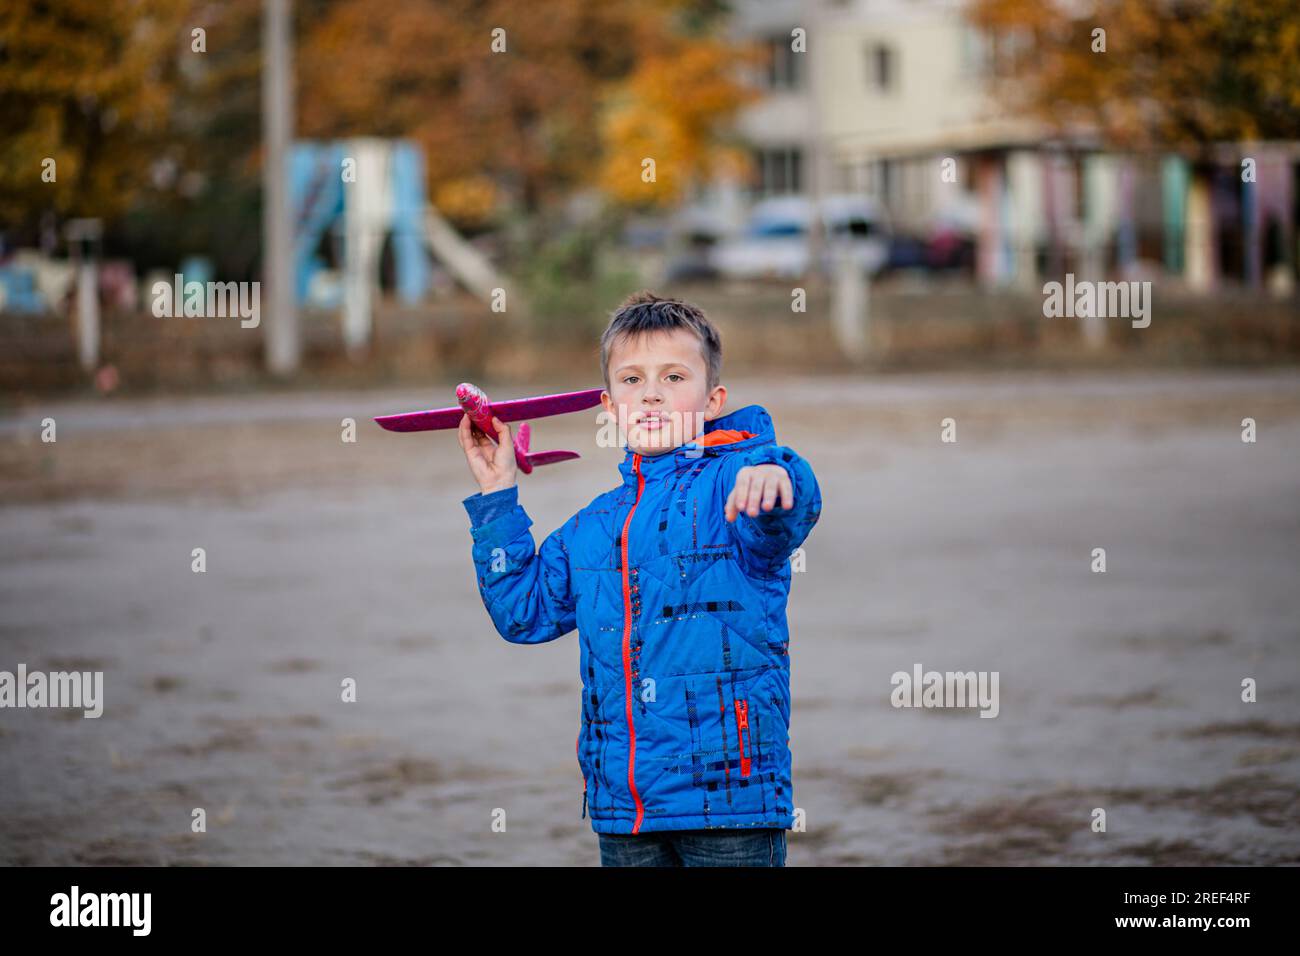 In the fall ambiance, a young boy playfully launches his toy airplane, channeling the spirit of a future pilot. Stock Photo